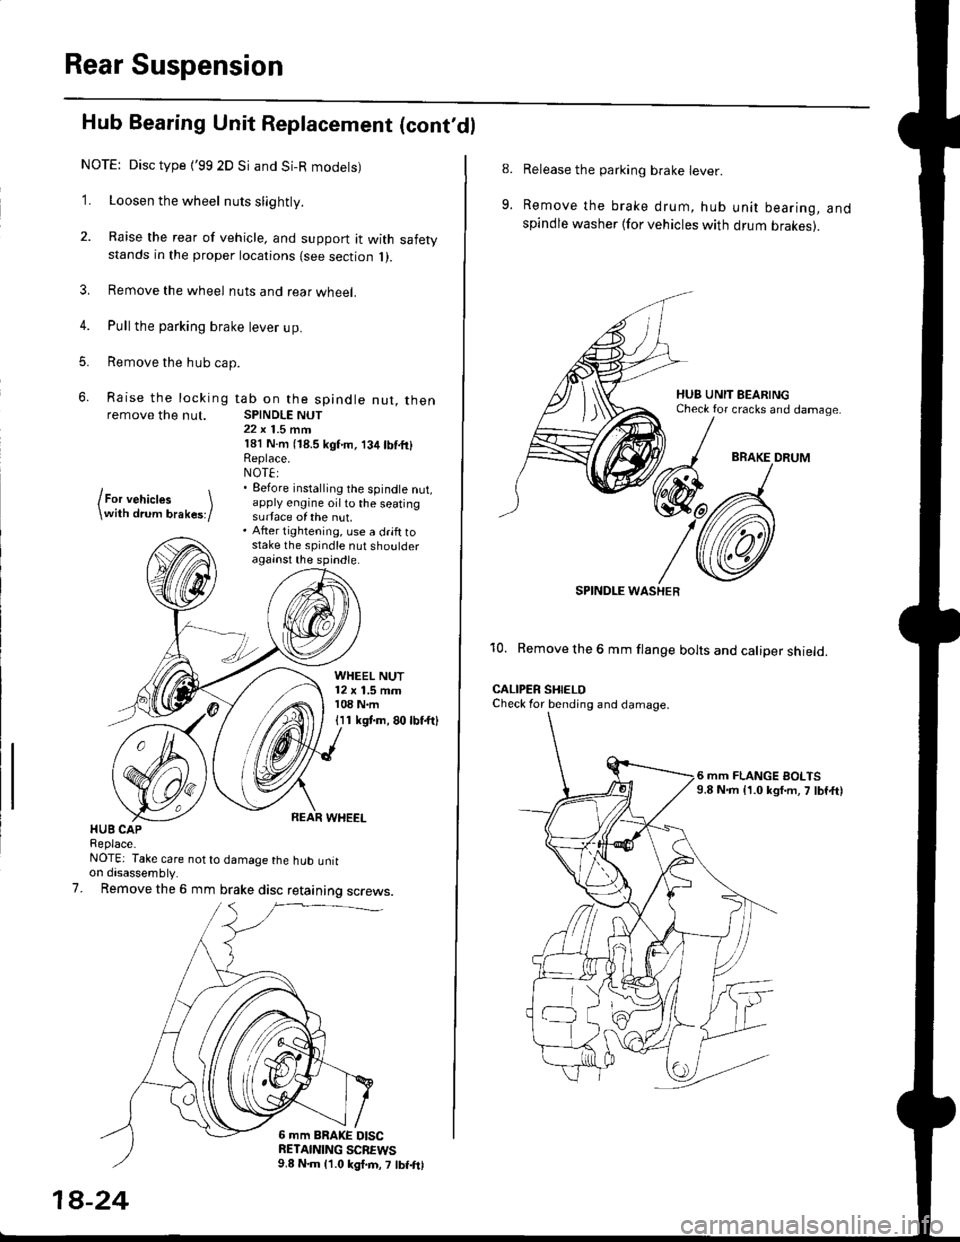 HONDA CIVIC 2000 6.G Workshop Manual Rear Suspension
Hub Bearing Unit Replacement (contdl
NOTE: Disc type {99 2D Si and Si-R modets)
1. Loosen the wheel nuts slightly.
2. Raise the rear of vehicle, and support it with safetystands in t